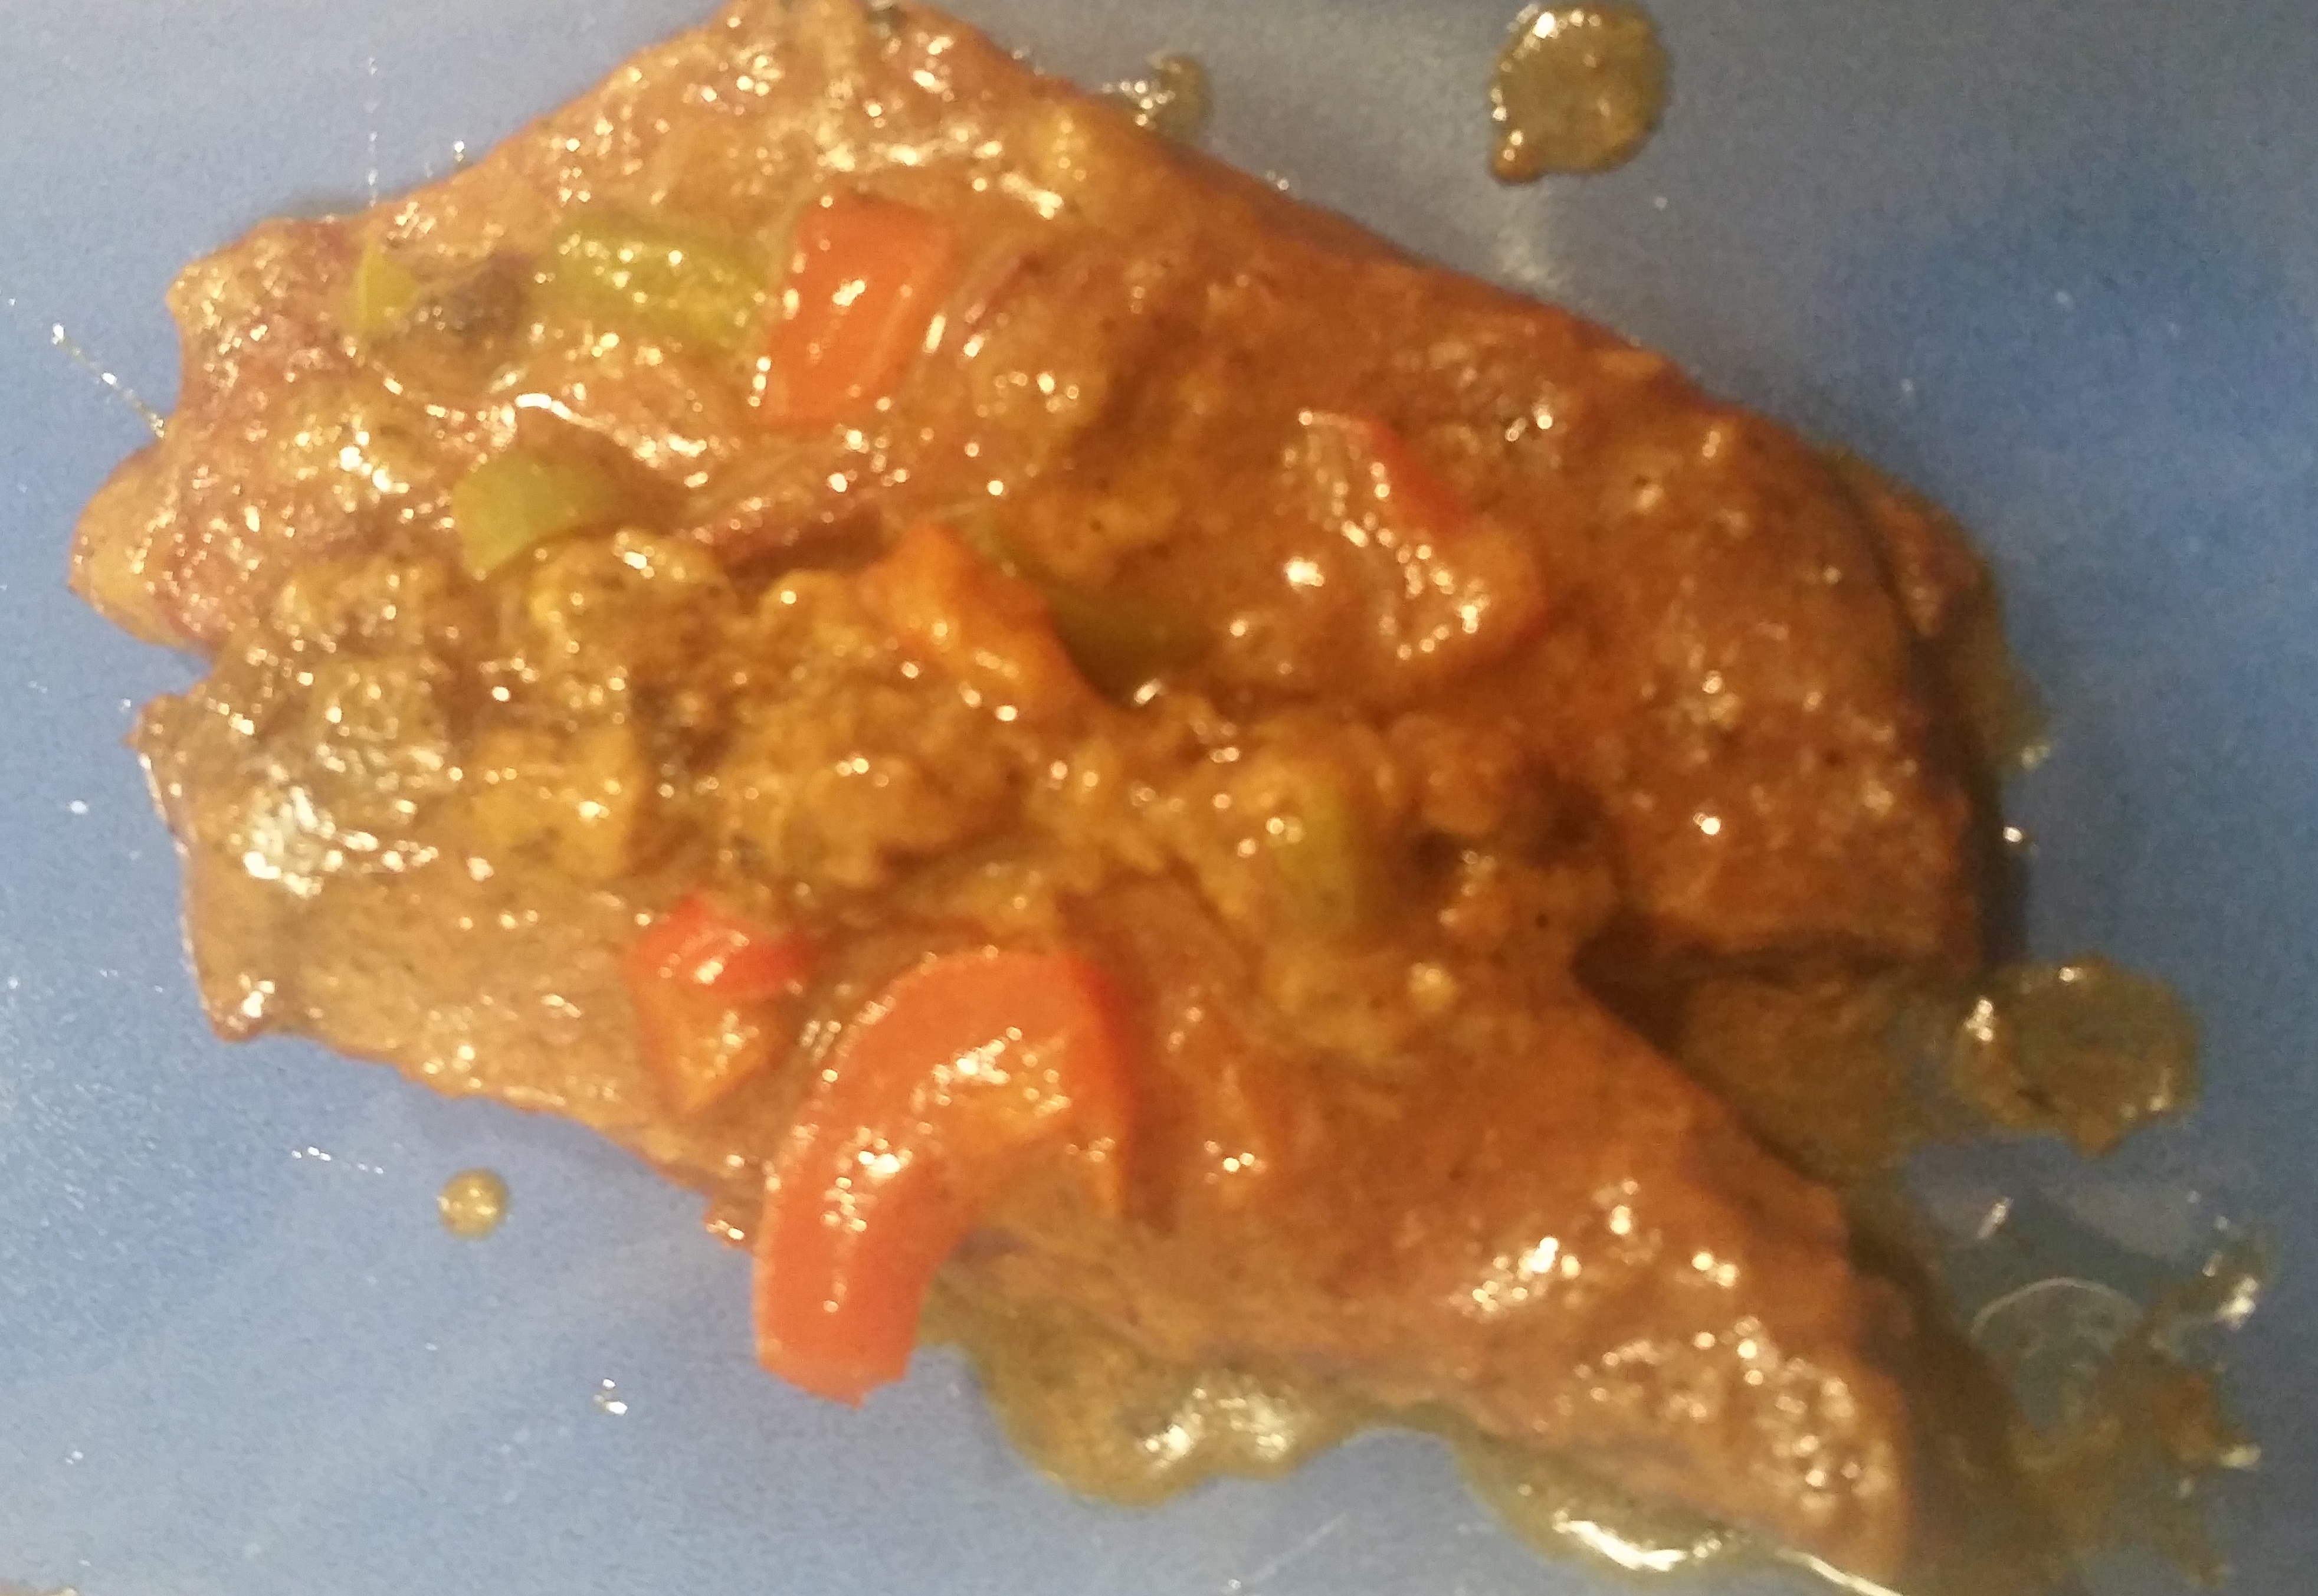 Meal of the Week – Boneless Short Ribs with Gravy